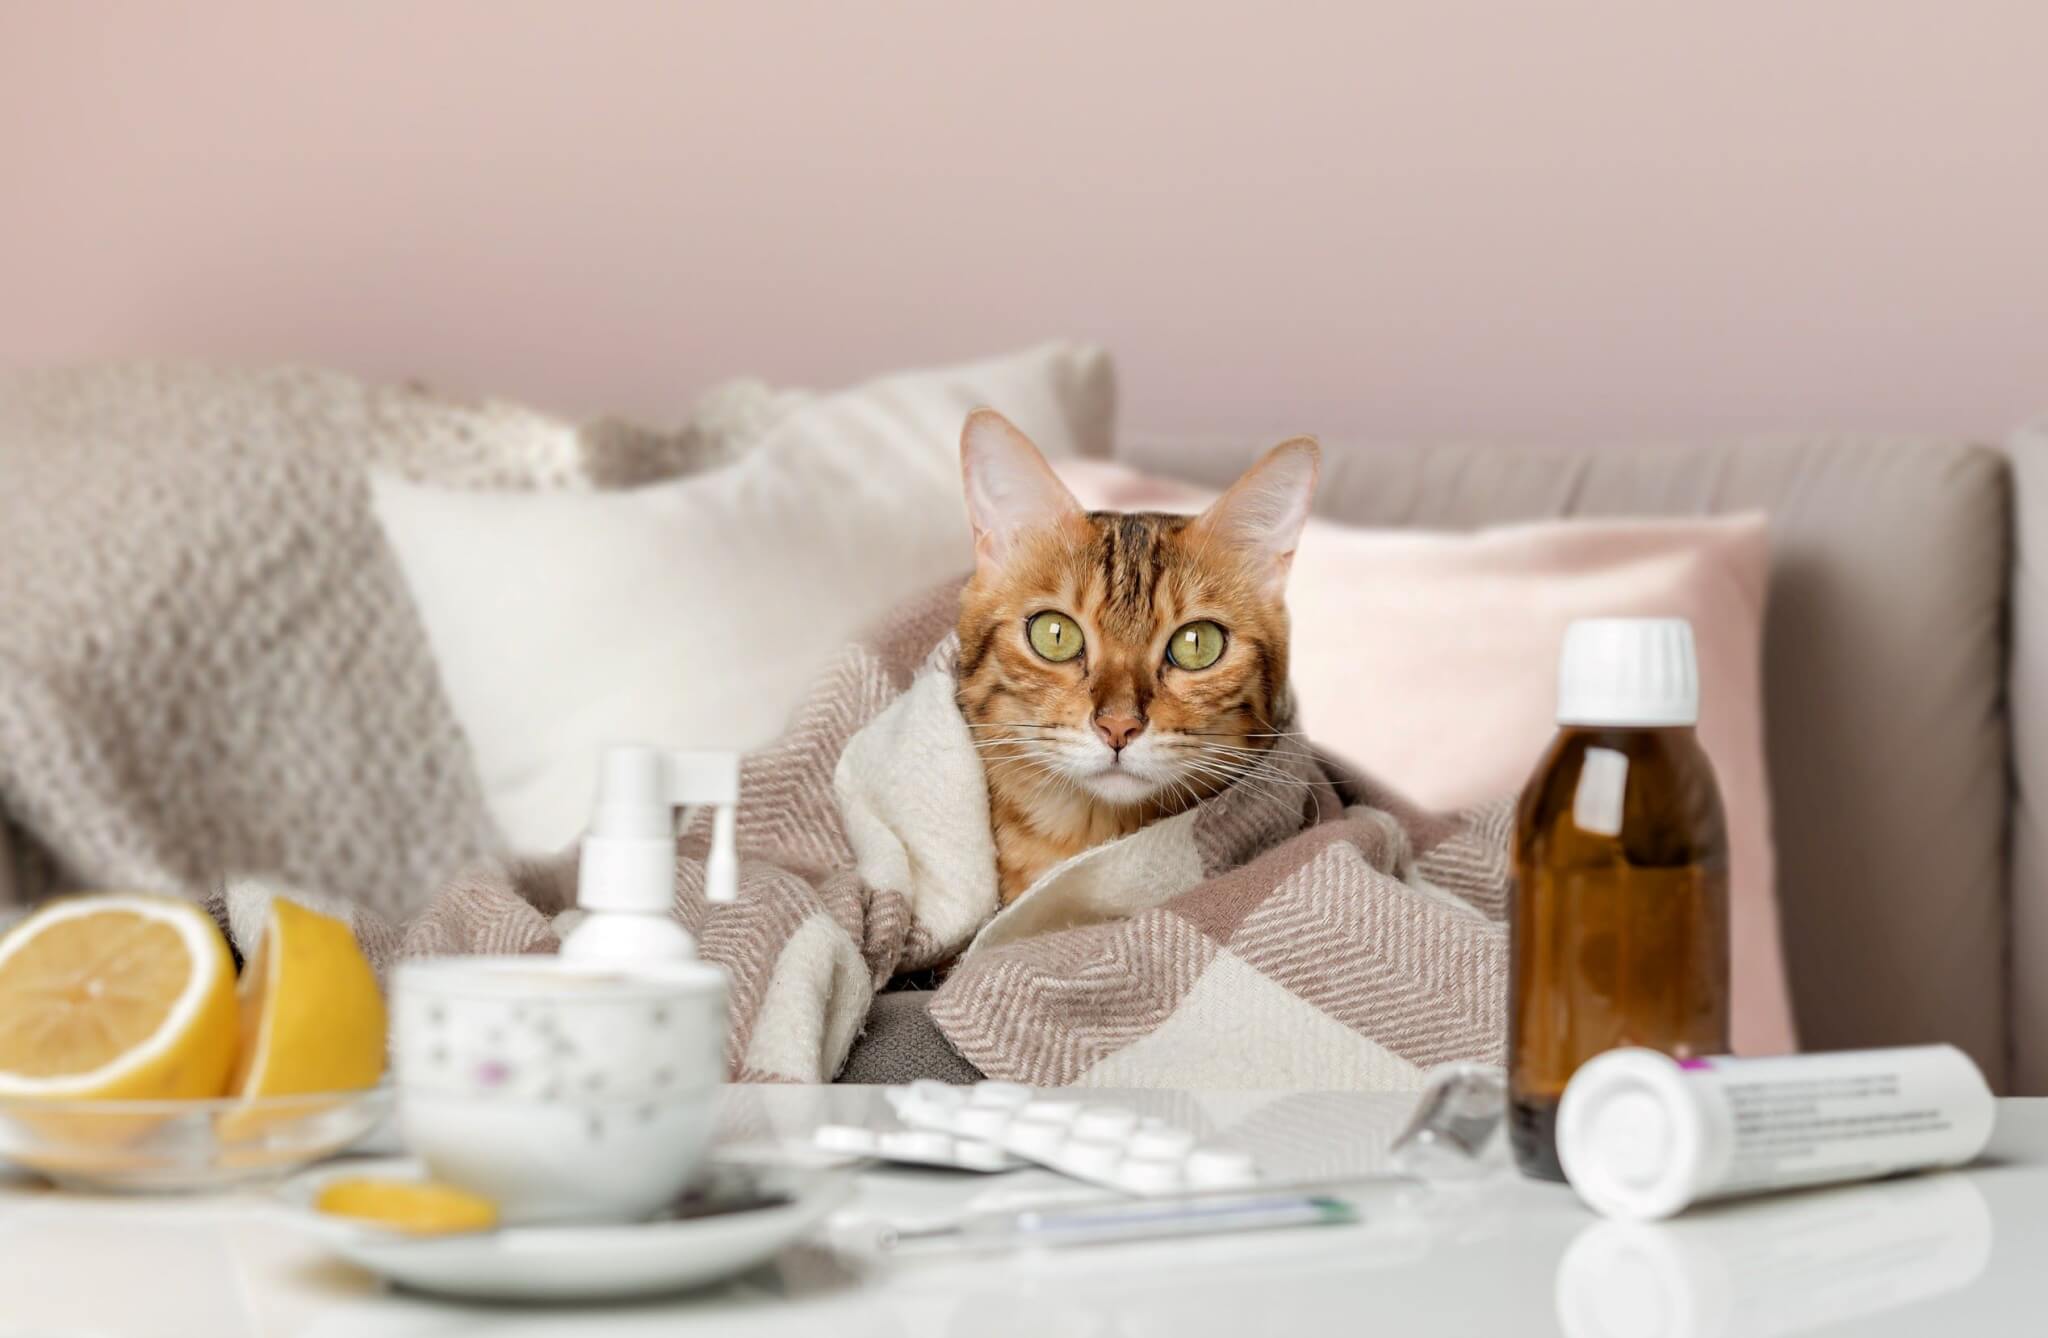 A sneezing cat sitting on a couch, surrounded by medicines